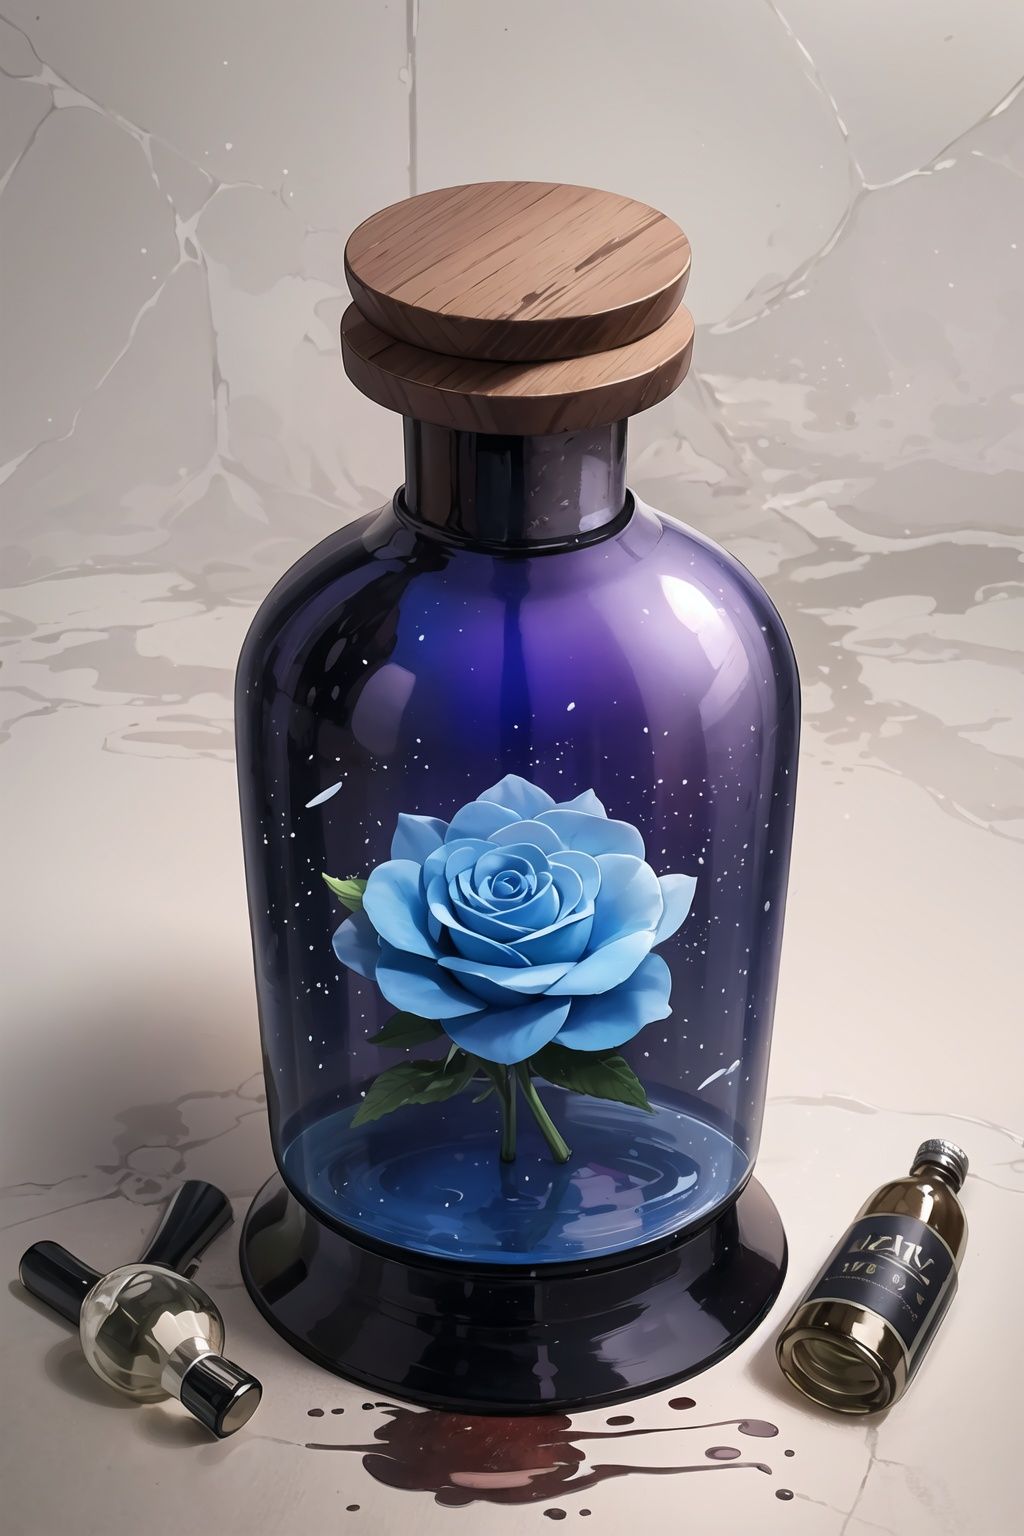 masterpiece,  best quality, (CGbottlesw:1.2), no one,  Metal carving,  Colorful Bottle, (The bottle was full of blood:1.1), There is a blue rose in the bottle